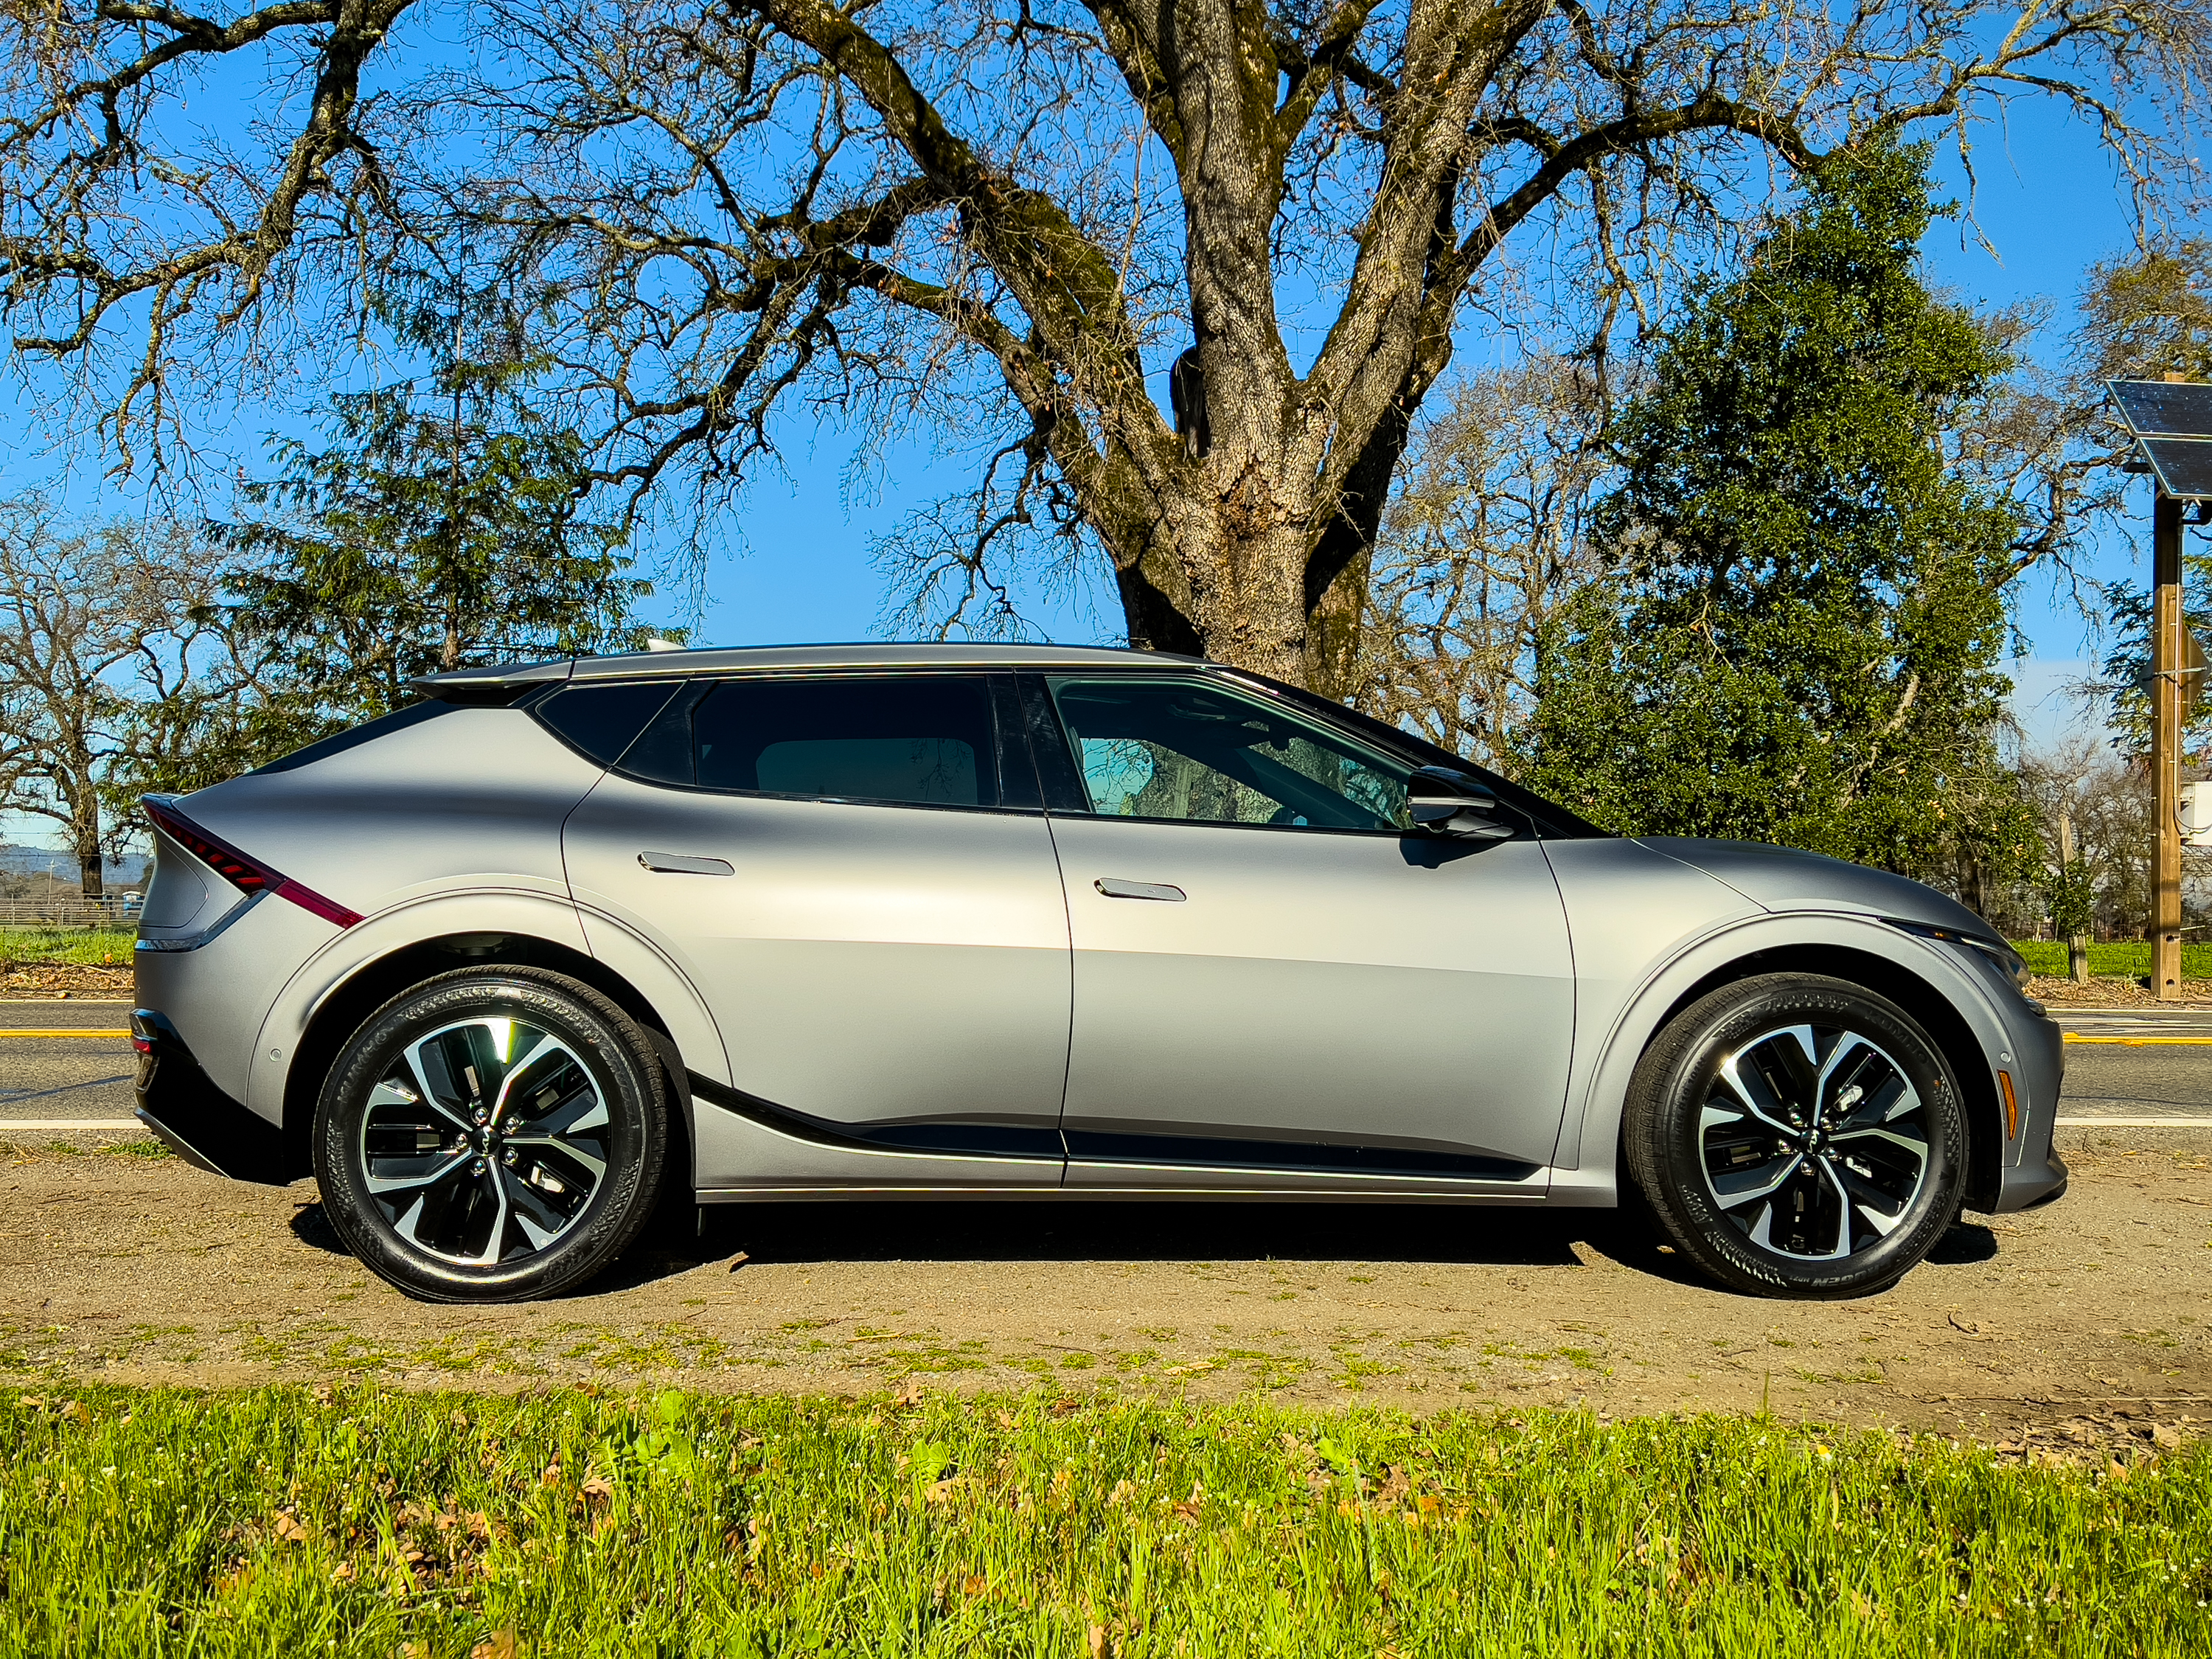 Kia's new EV6 electric crossover goes straight to the head of the pack